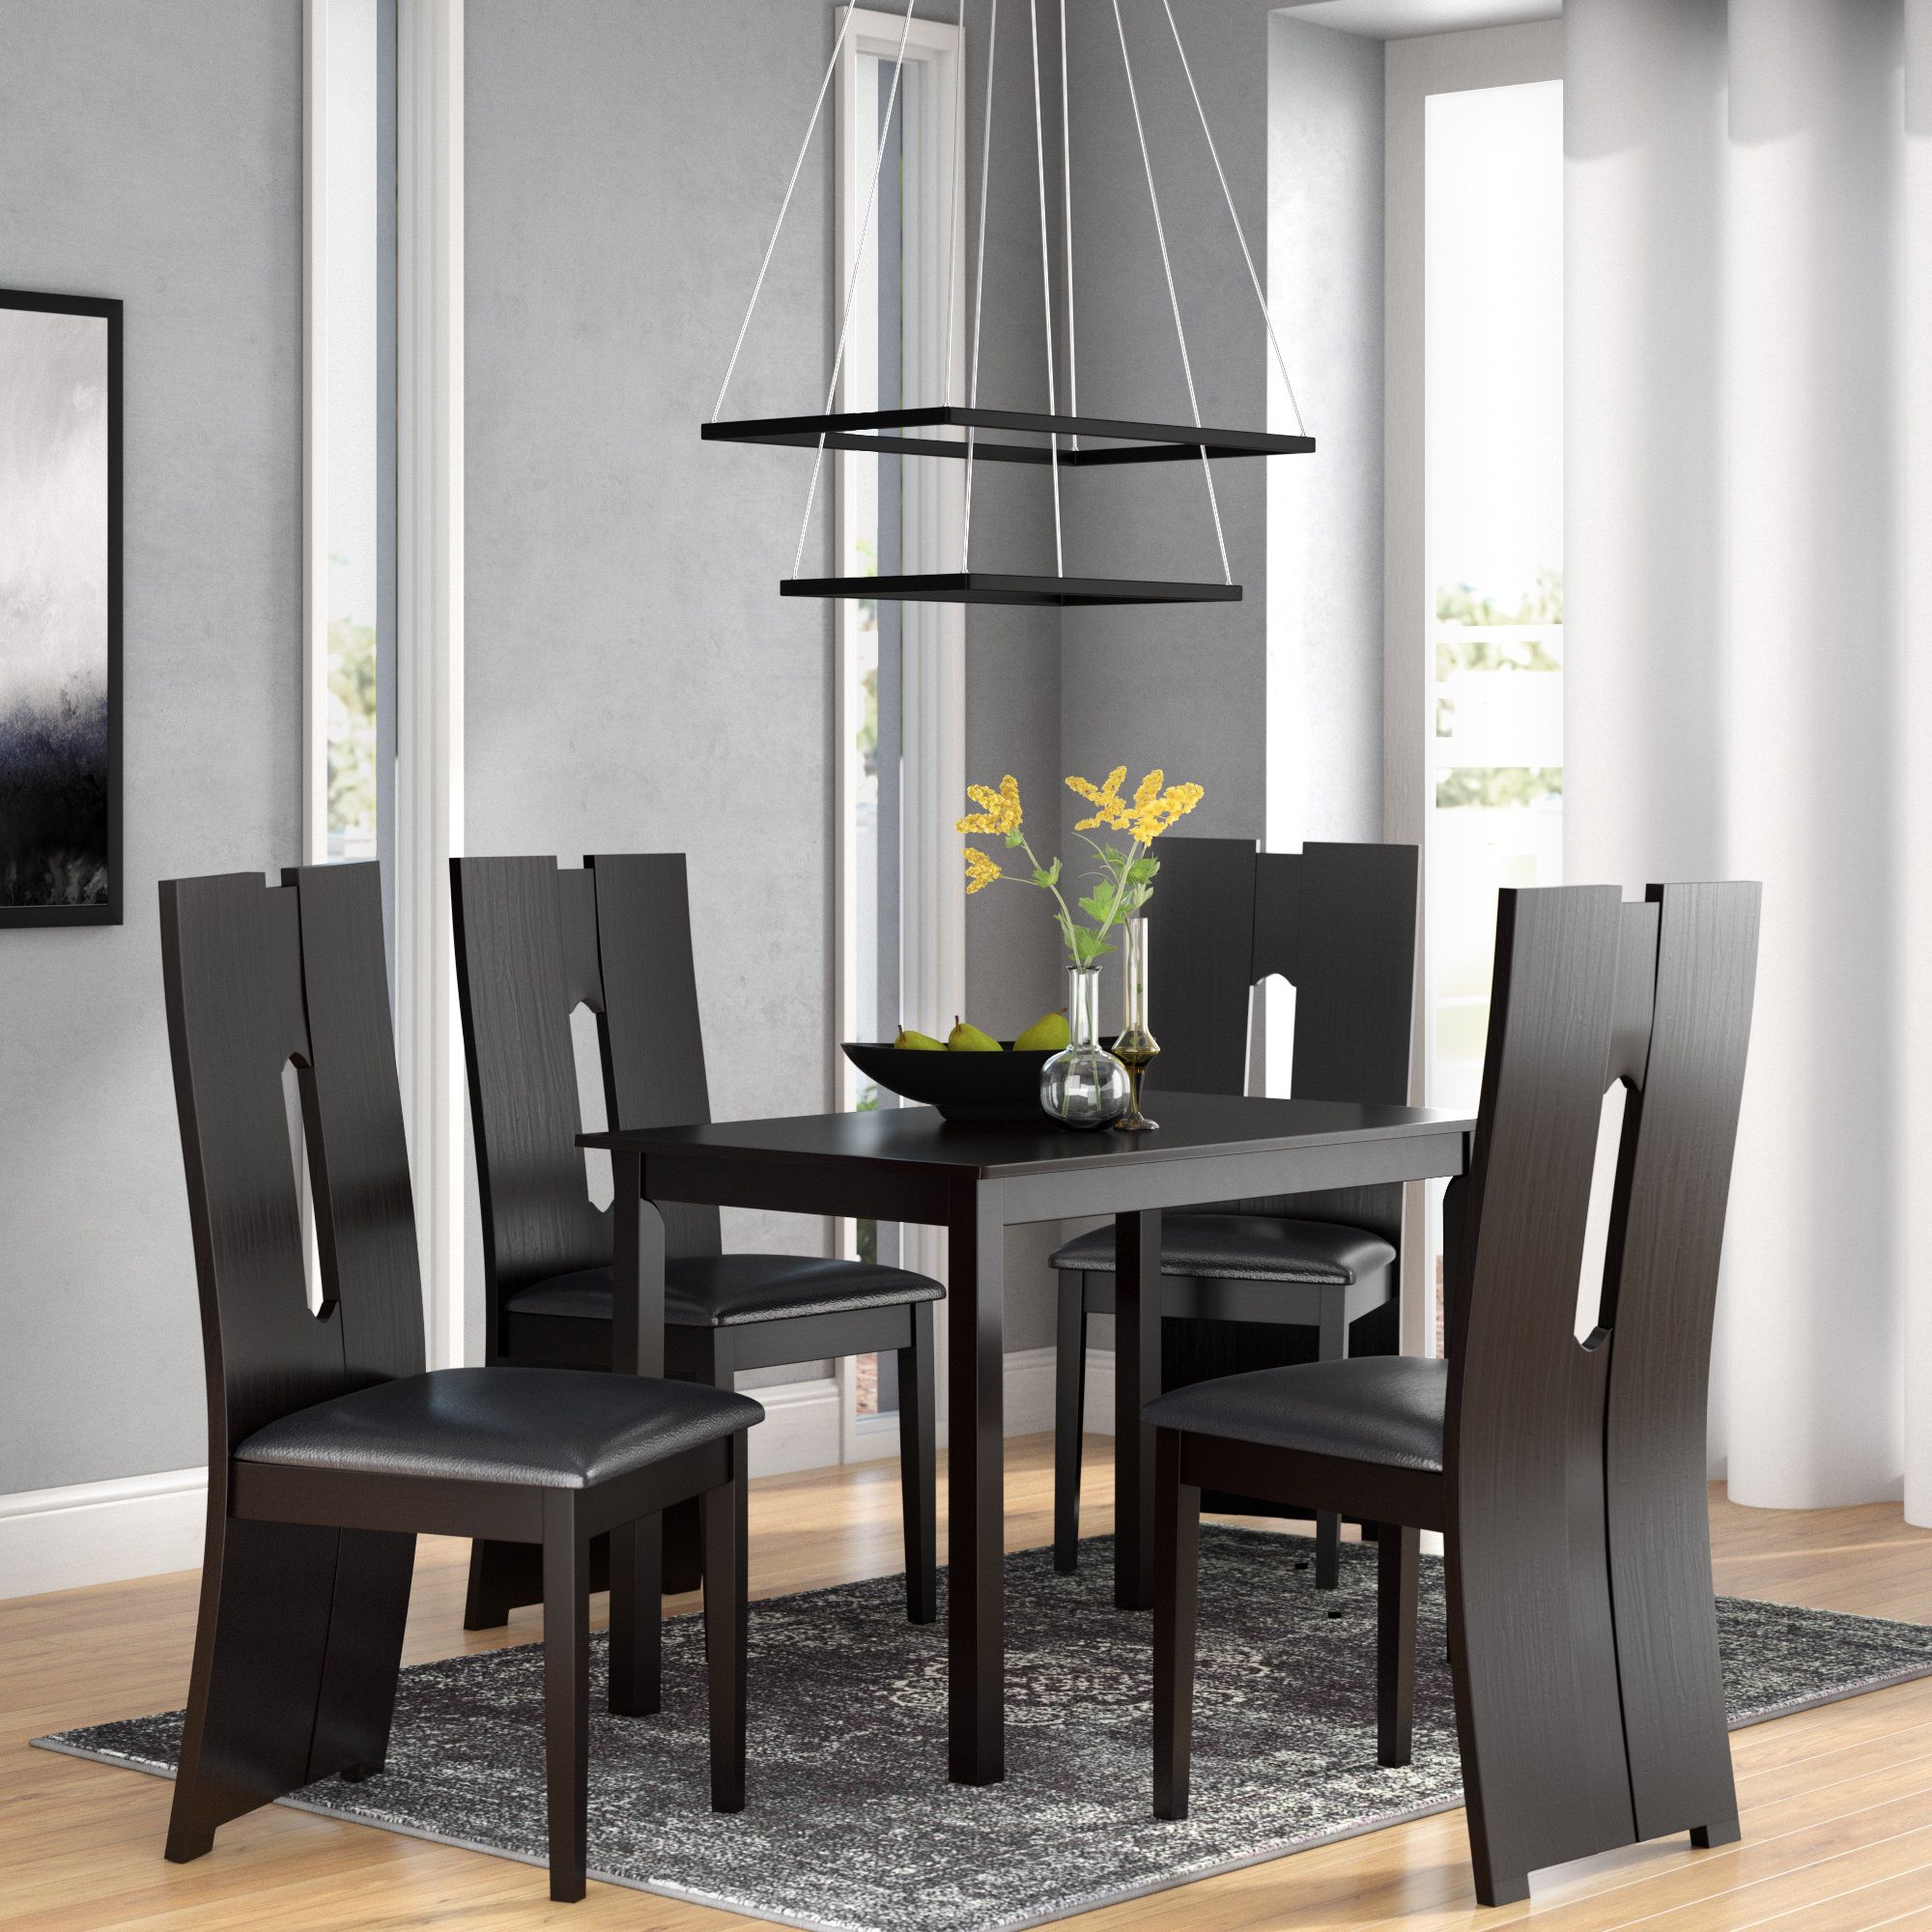 Onsted Modern And Contemporary 5 Piece Breakfast Nook Dining Set Throughout Most Recently Released Maynard 5 Piece Dining Sets (View 9 of 20)